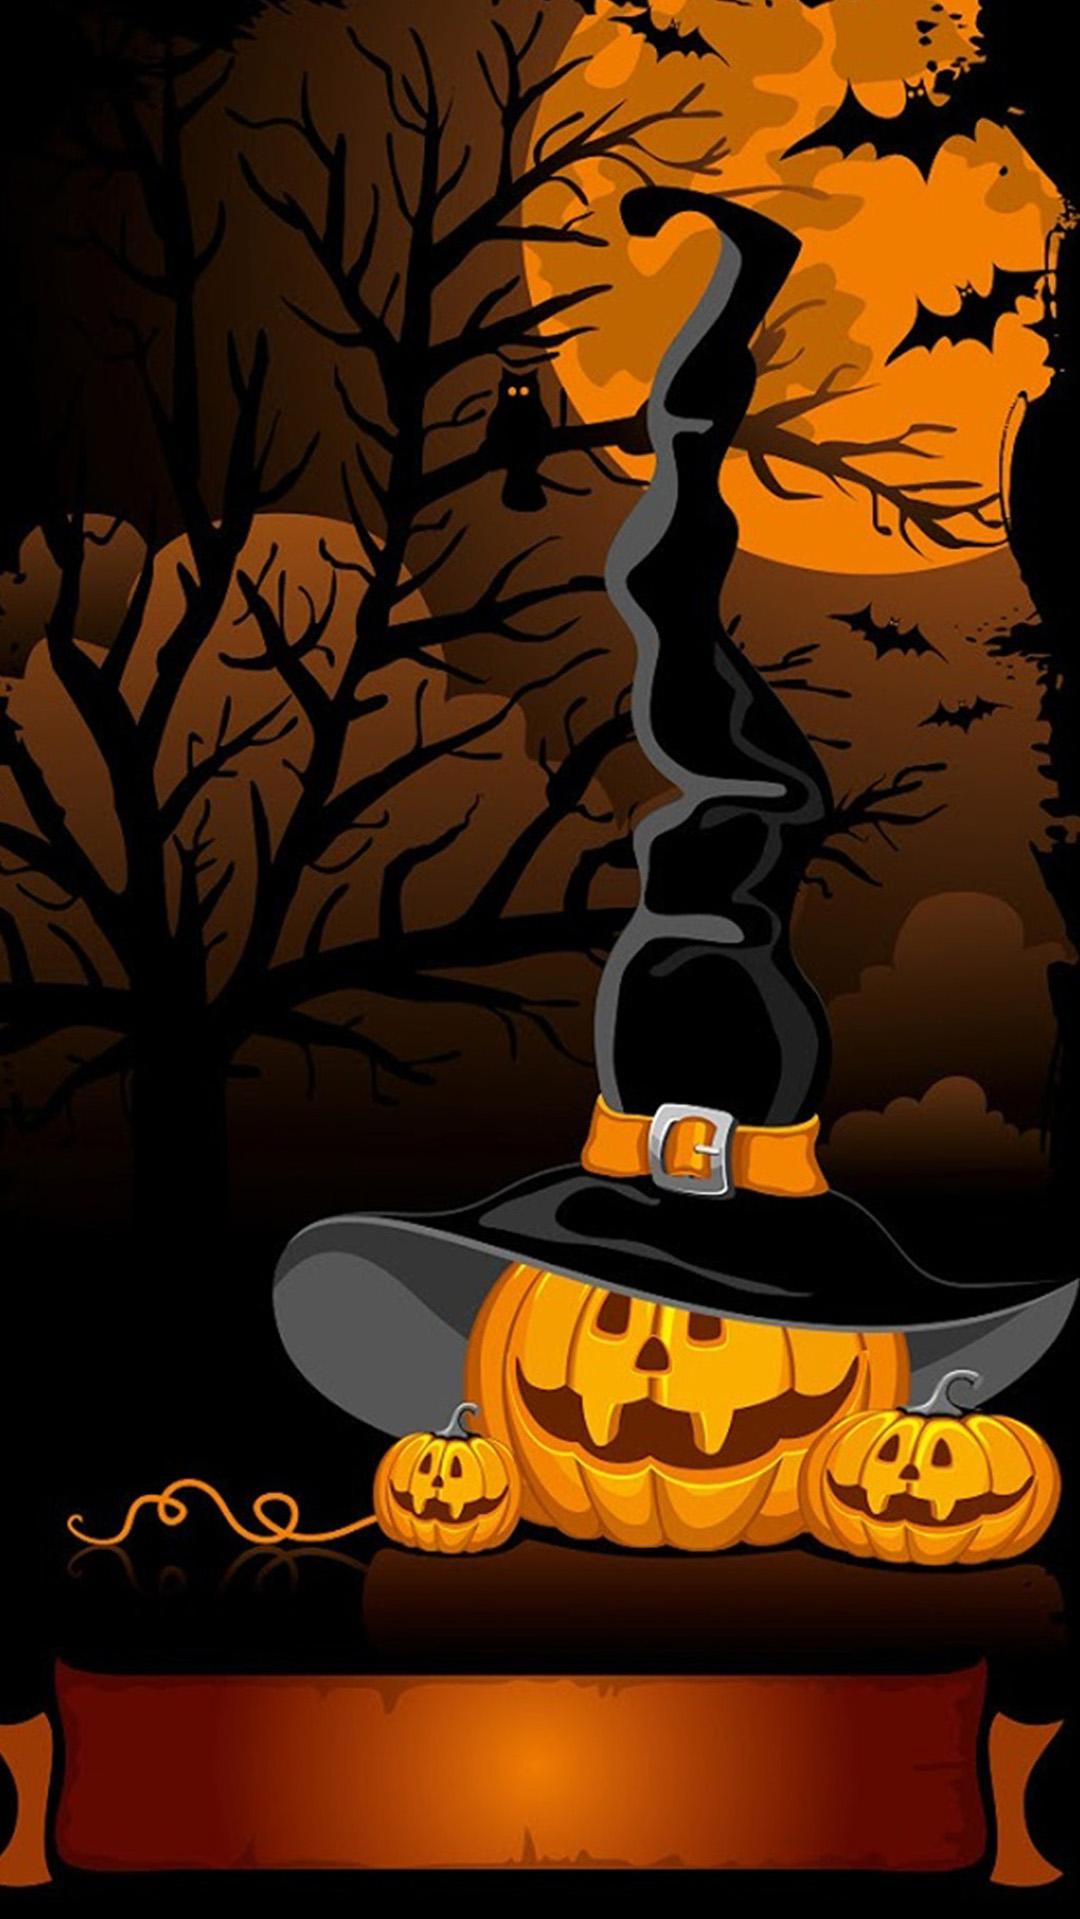 Witchy Halloween Wallpaper Night